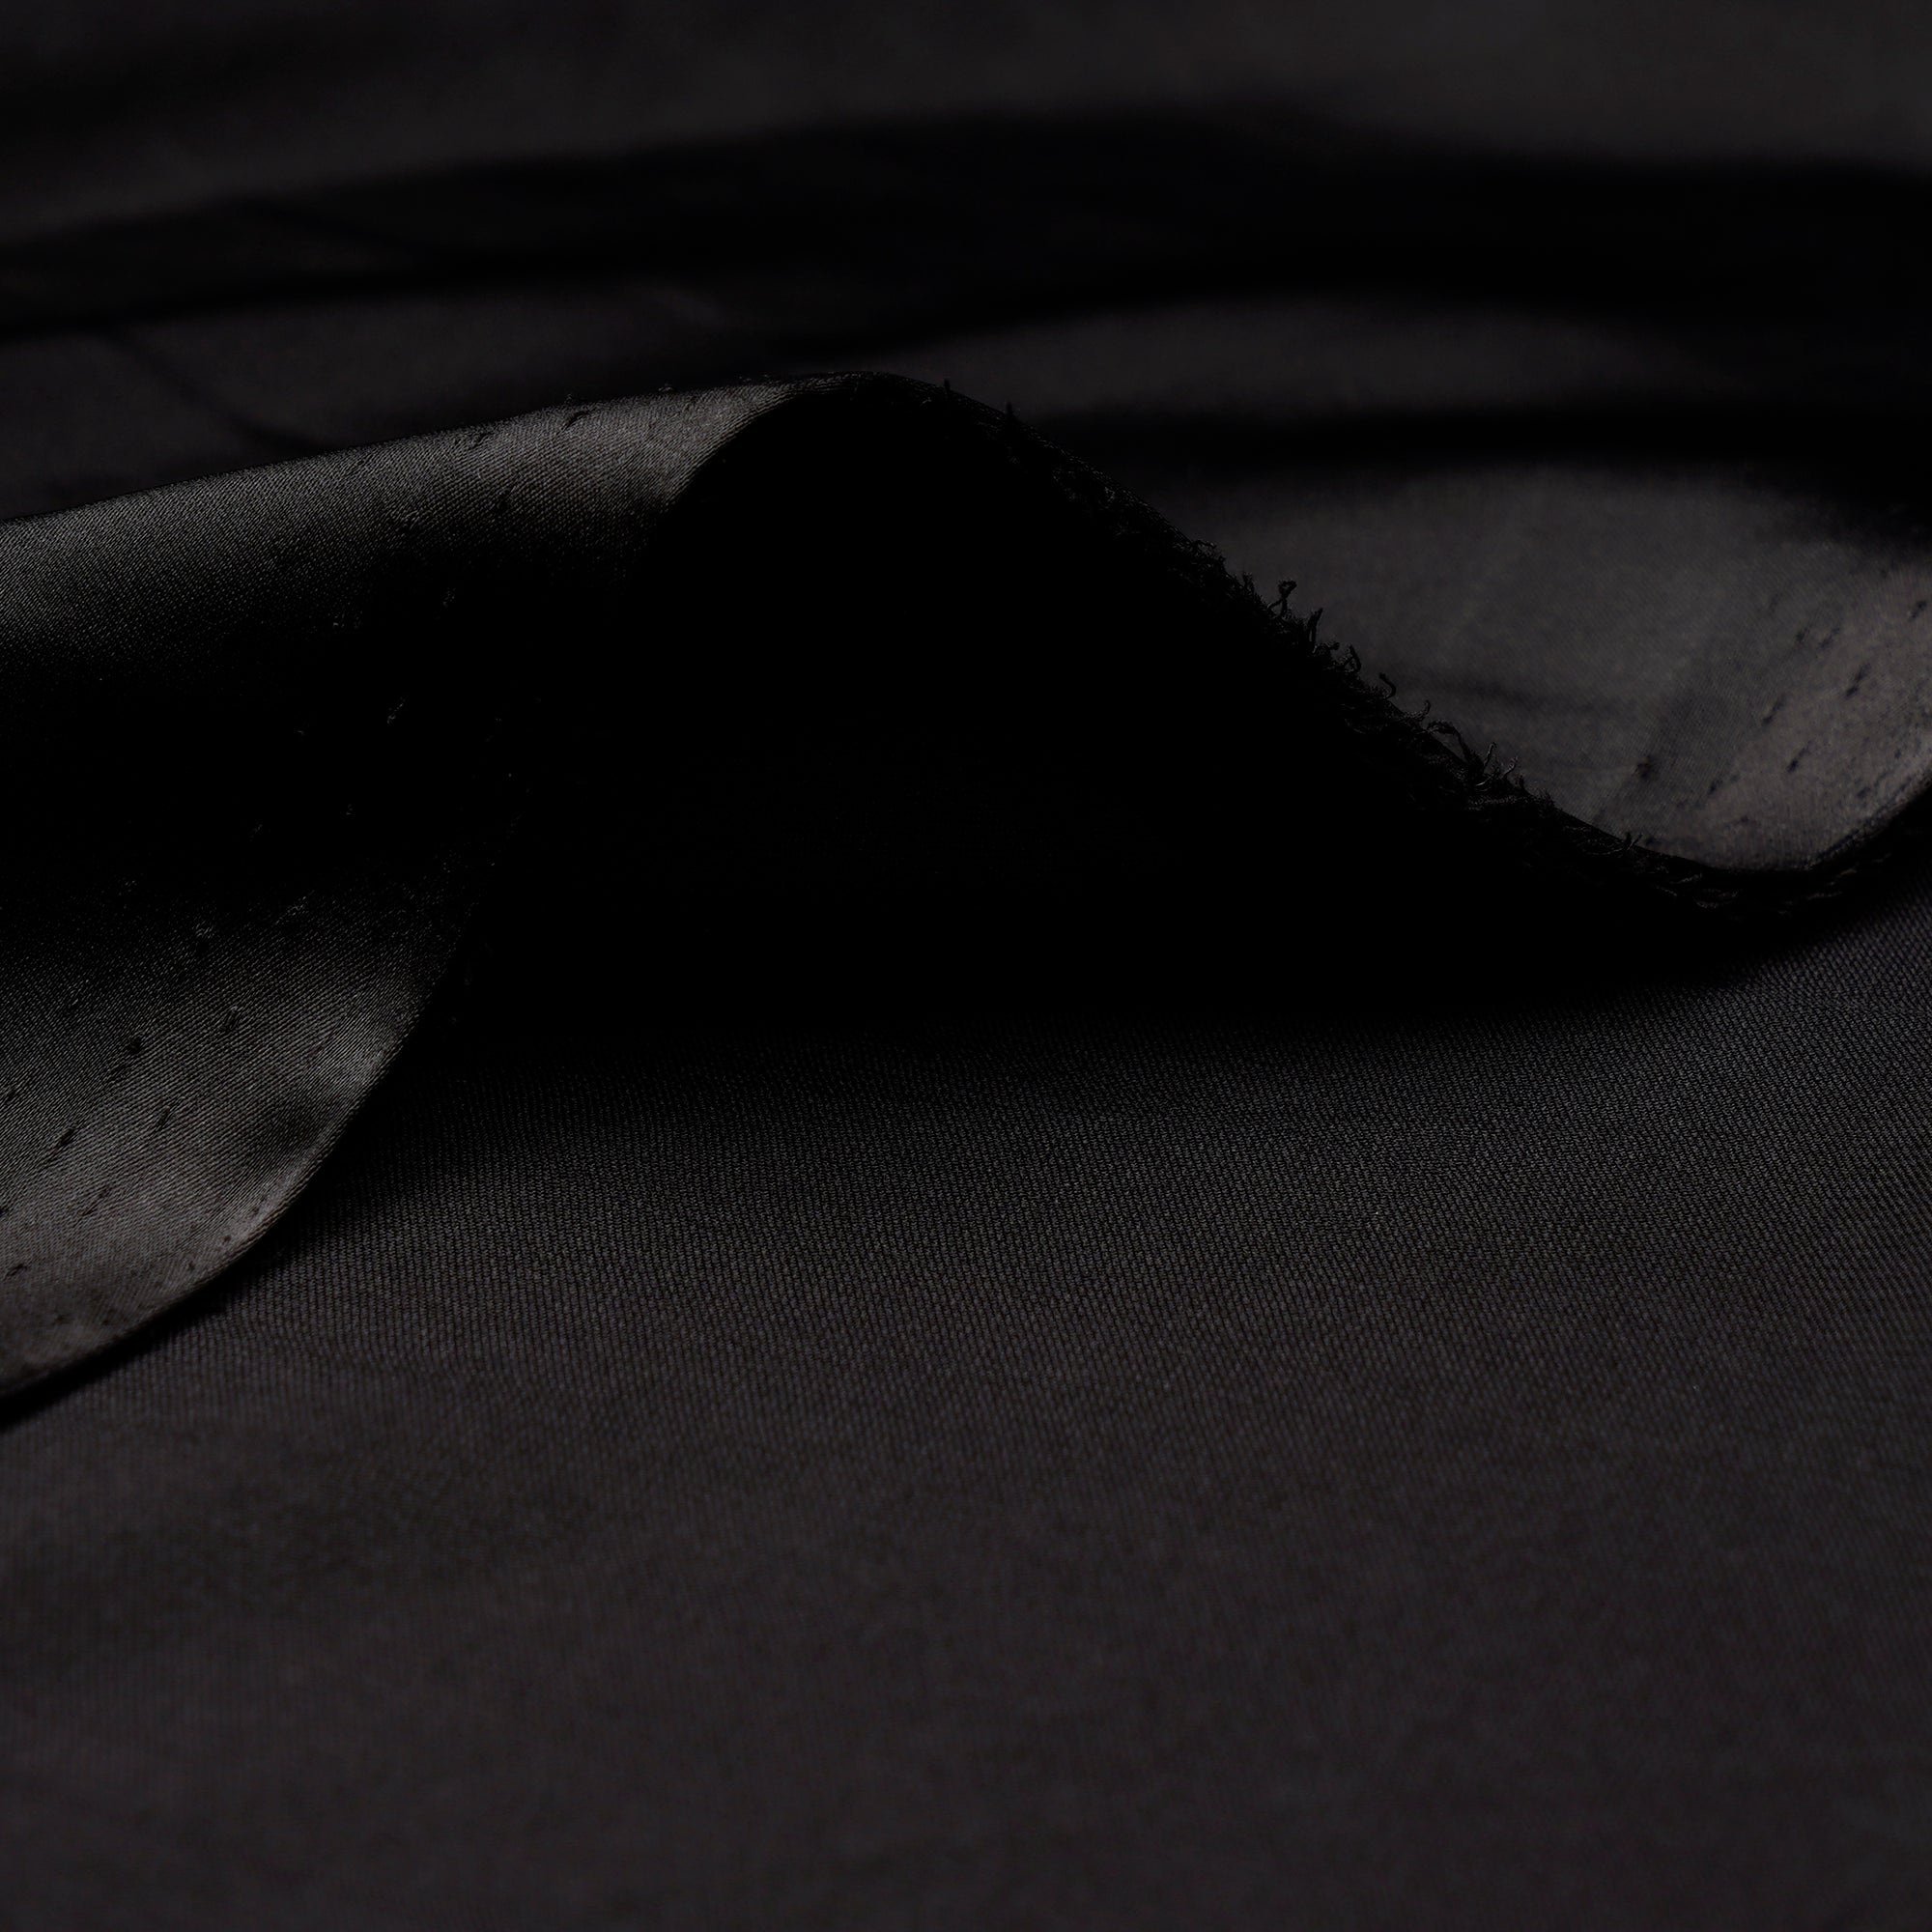 1 X Black Satin Fabric 60 Inch Wide - by The Yard - for Weddings, Decor,  Gow.